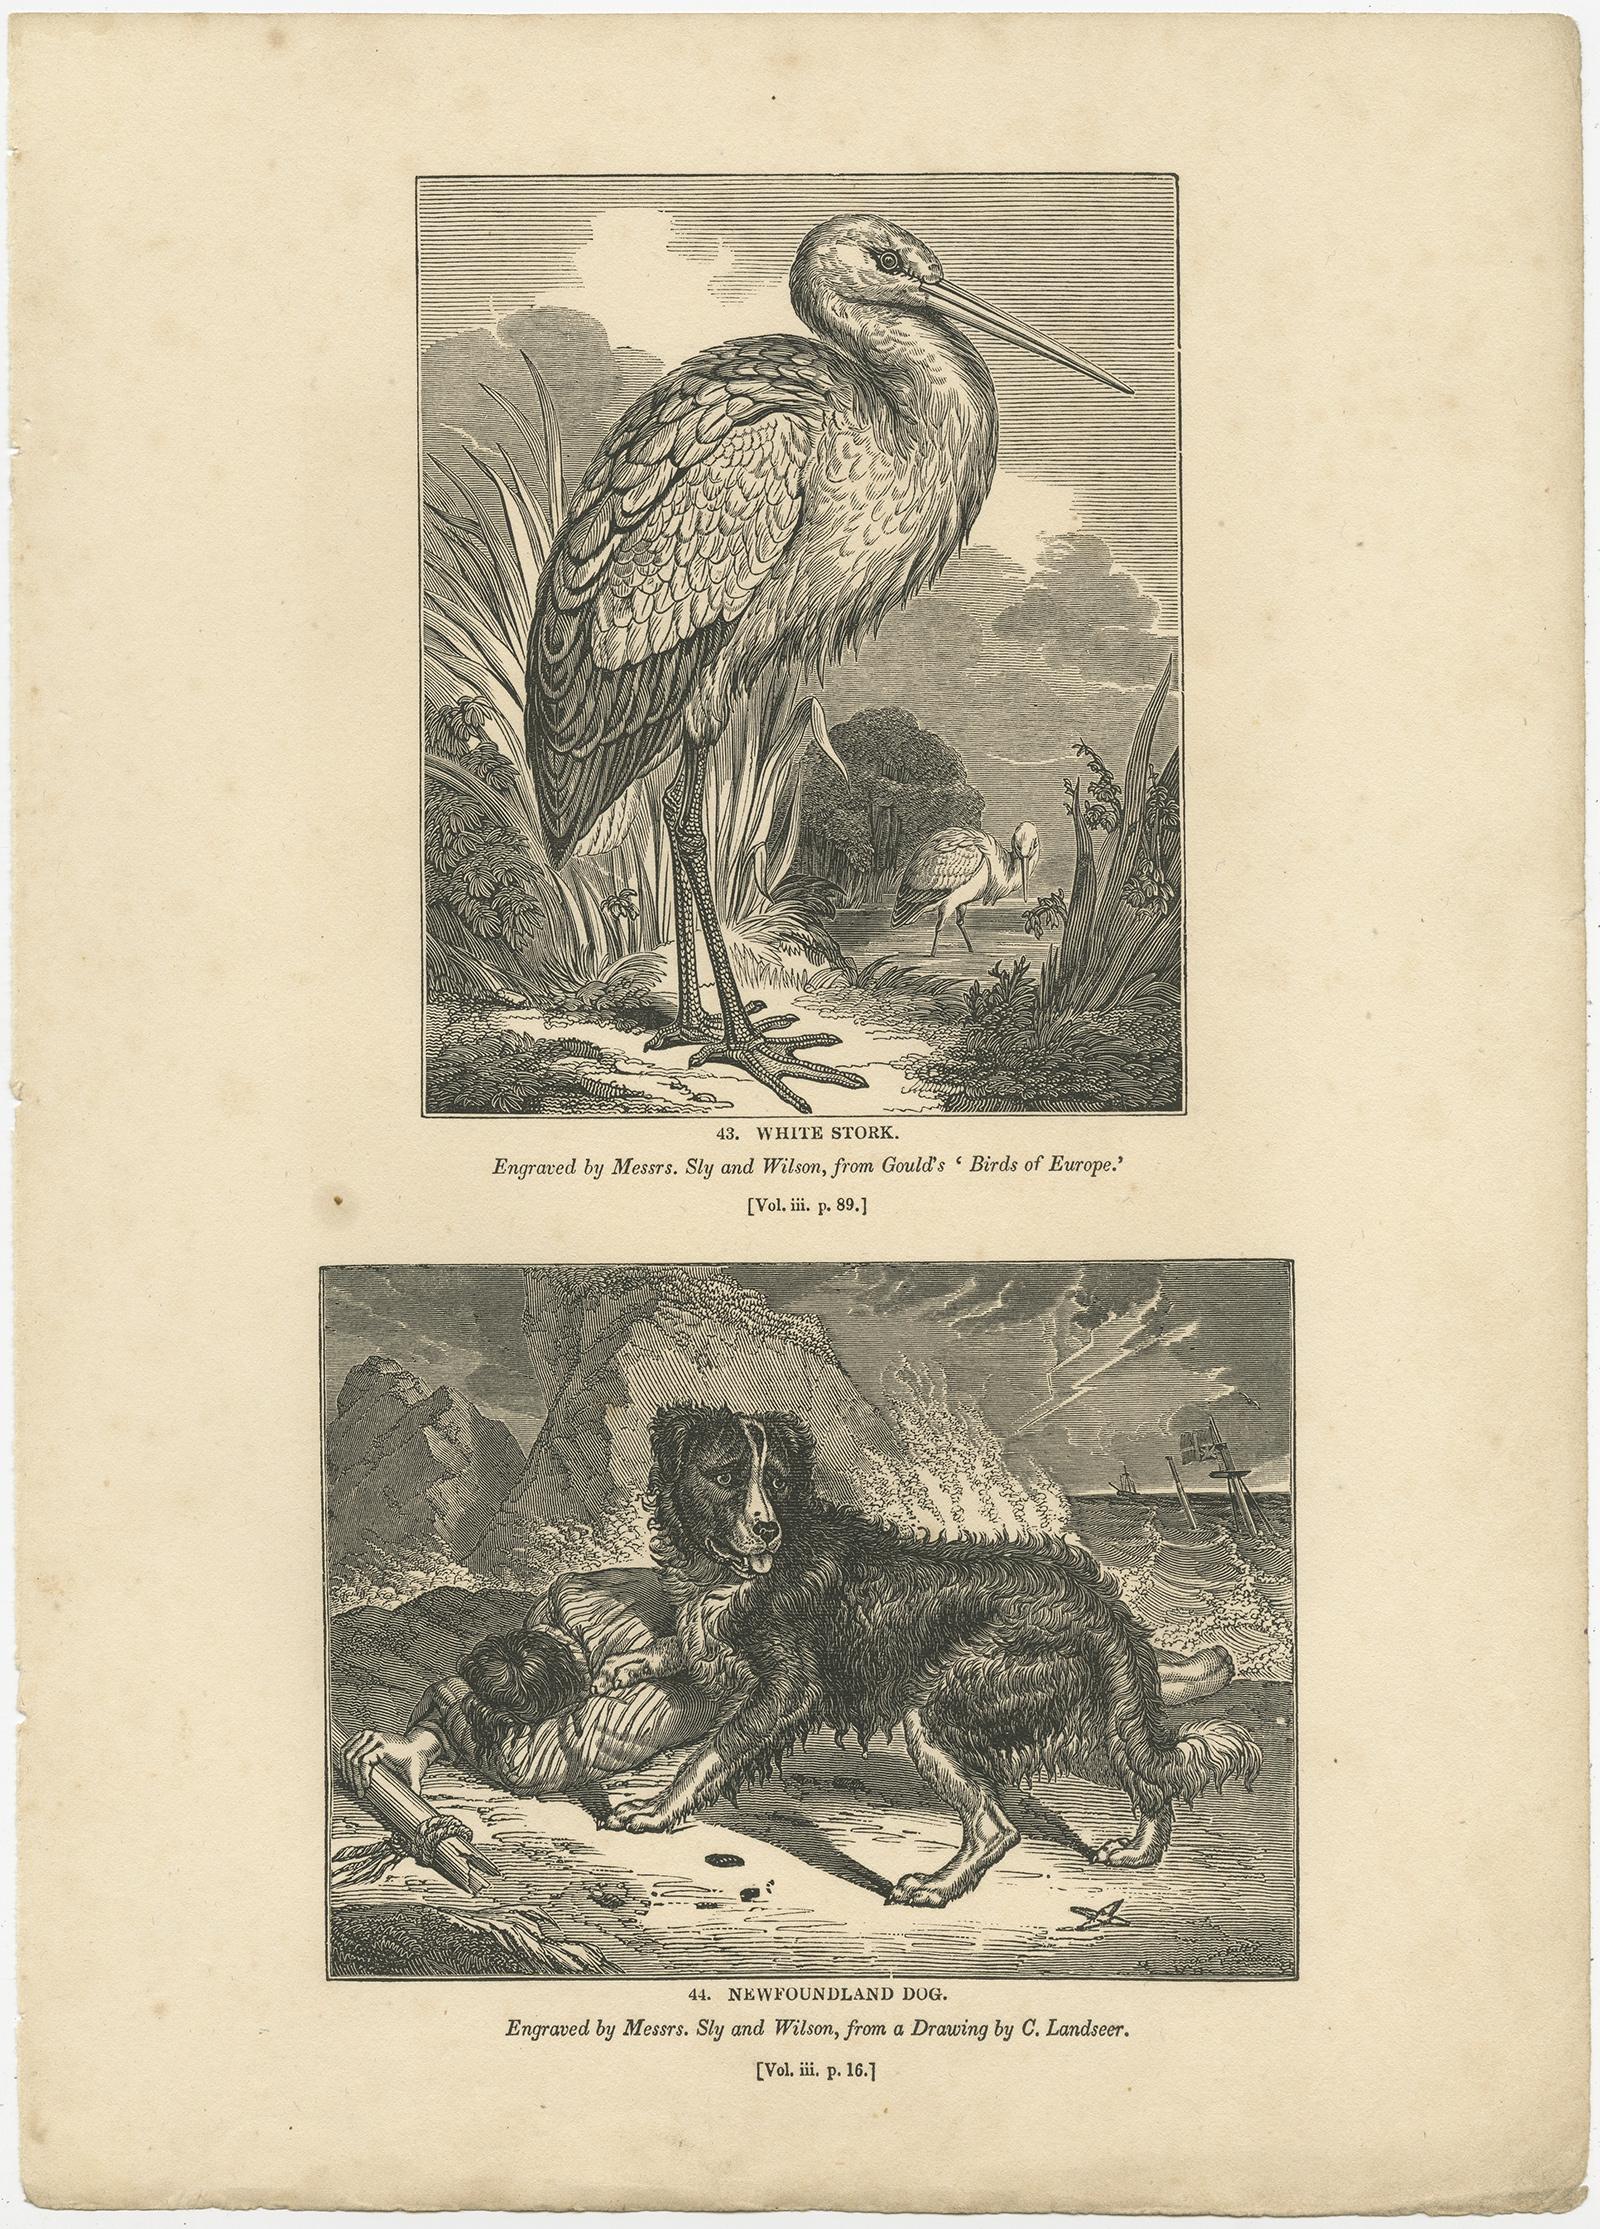 Antique print titled 'White Stork - Newfoundland Dog'. Old print of a white stork and newfoundlander dog. This print originates from 'One Hundred and Fifty Wood Cuts selected from the Penny Magazine'. 

Artists and Engravers: Published by Charles